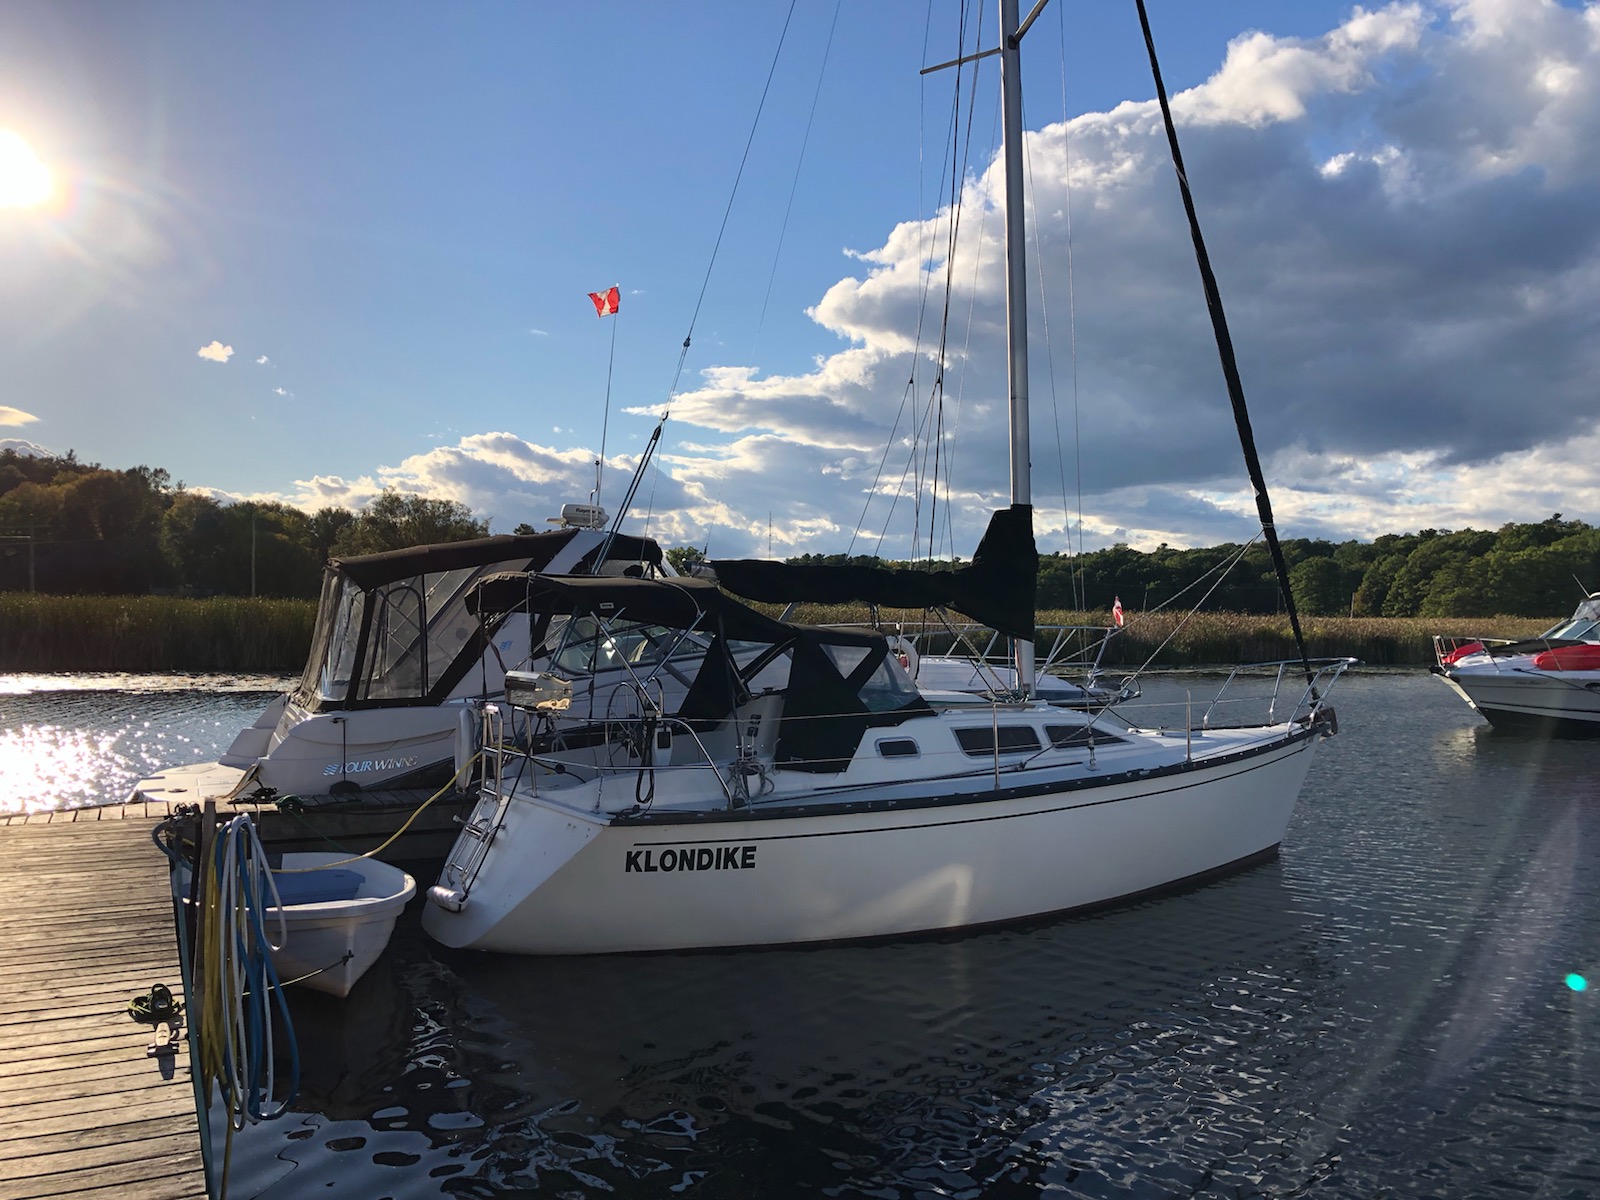 1984 29 foot Mirage Sailboat Sailboat for sale in Ontario, Canada - image 1 